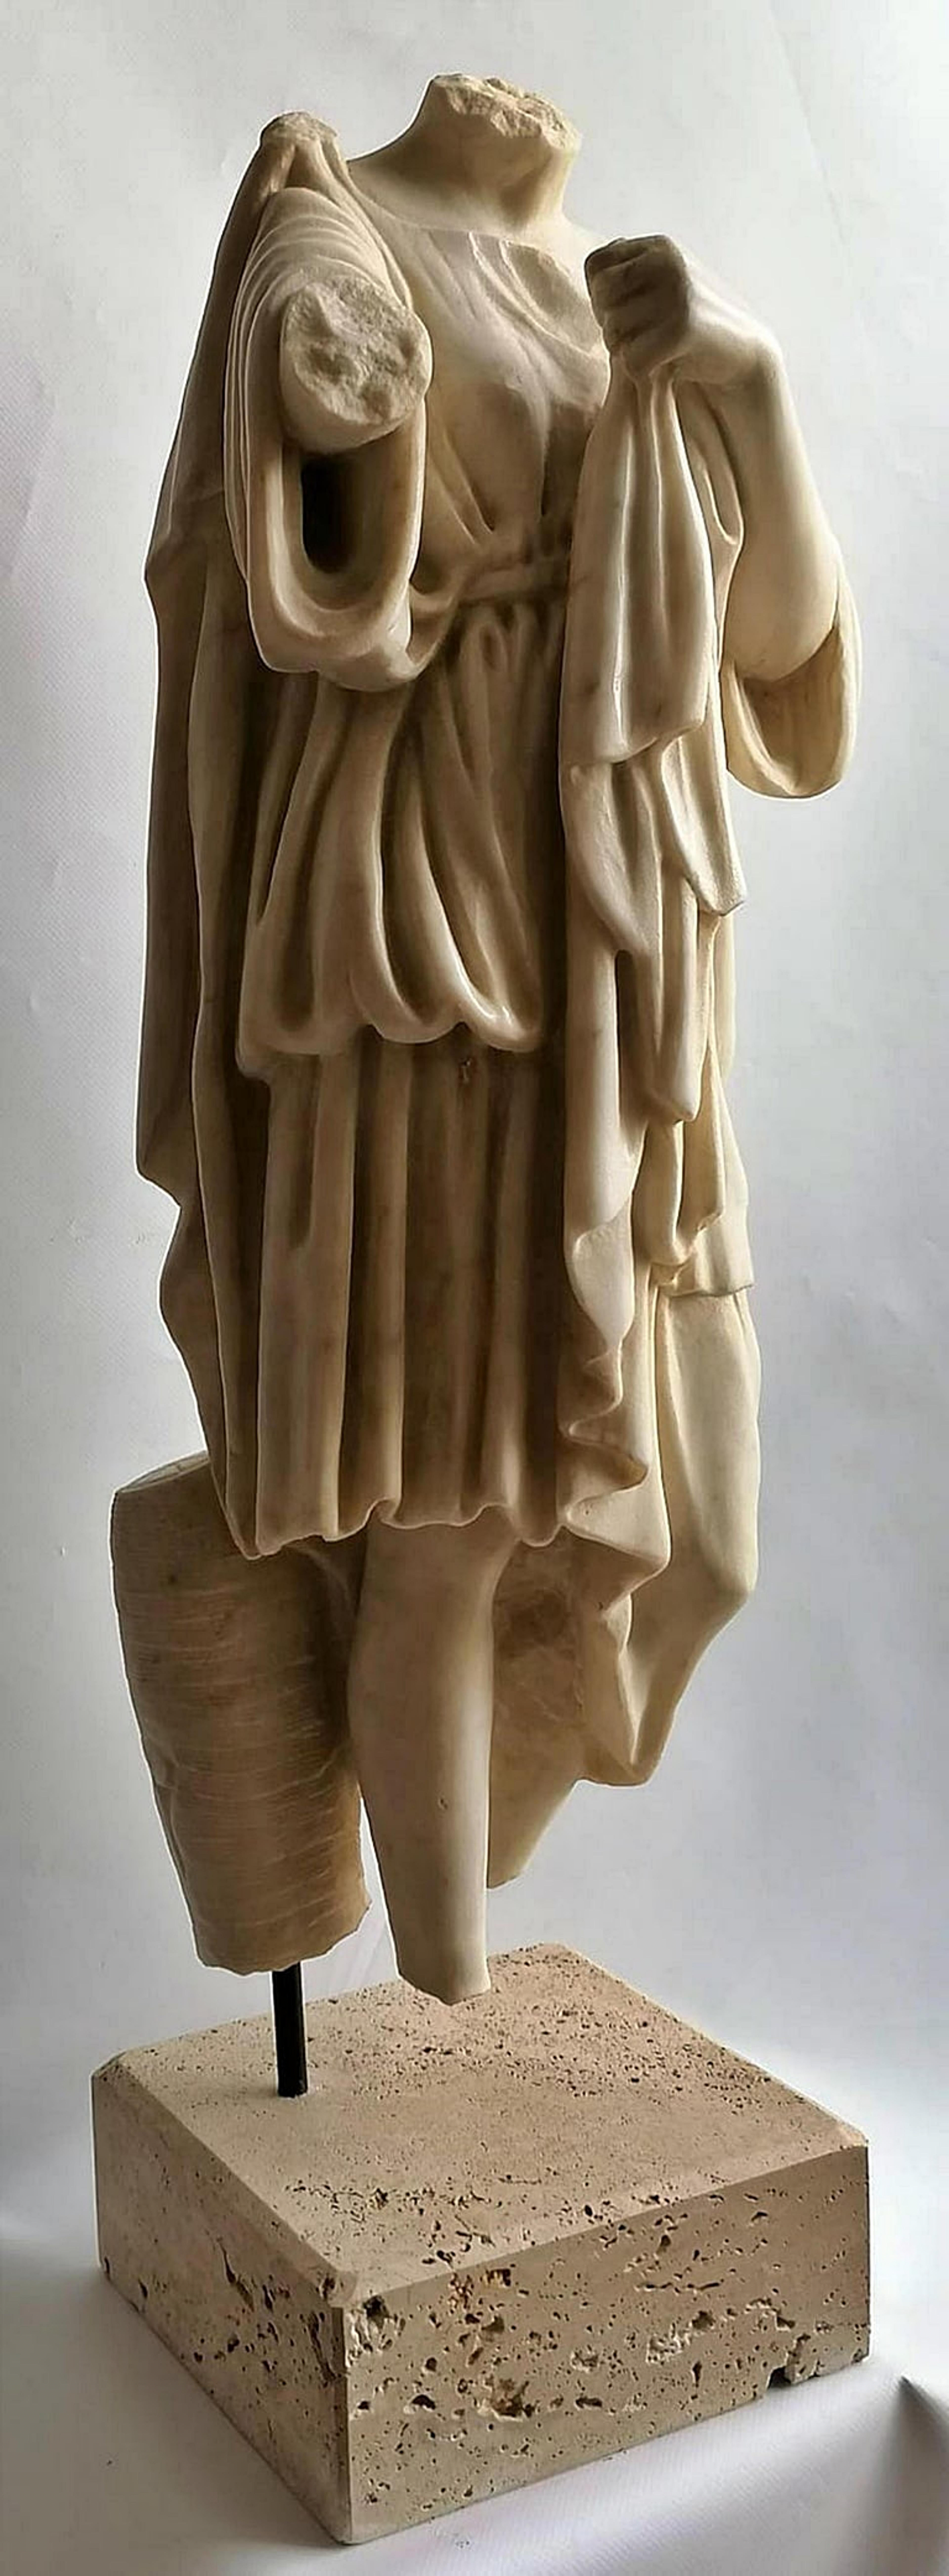 Hand-Crafted Italian Sculpture 